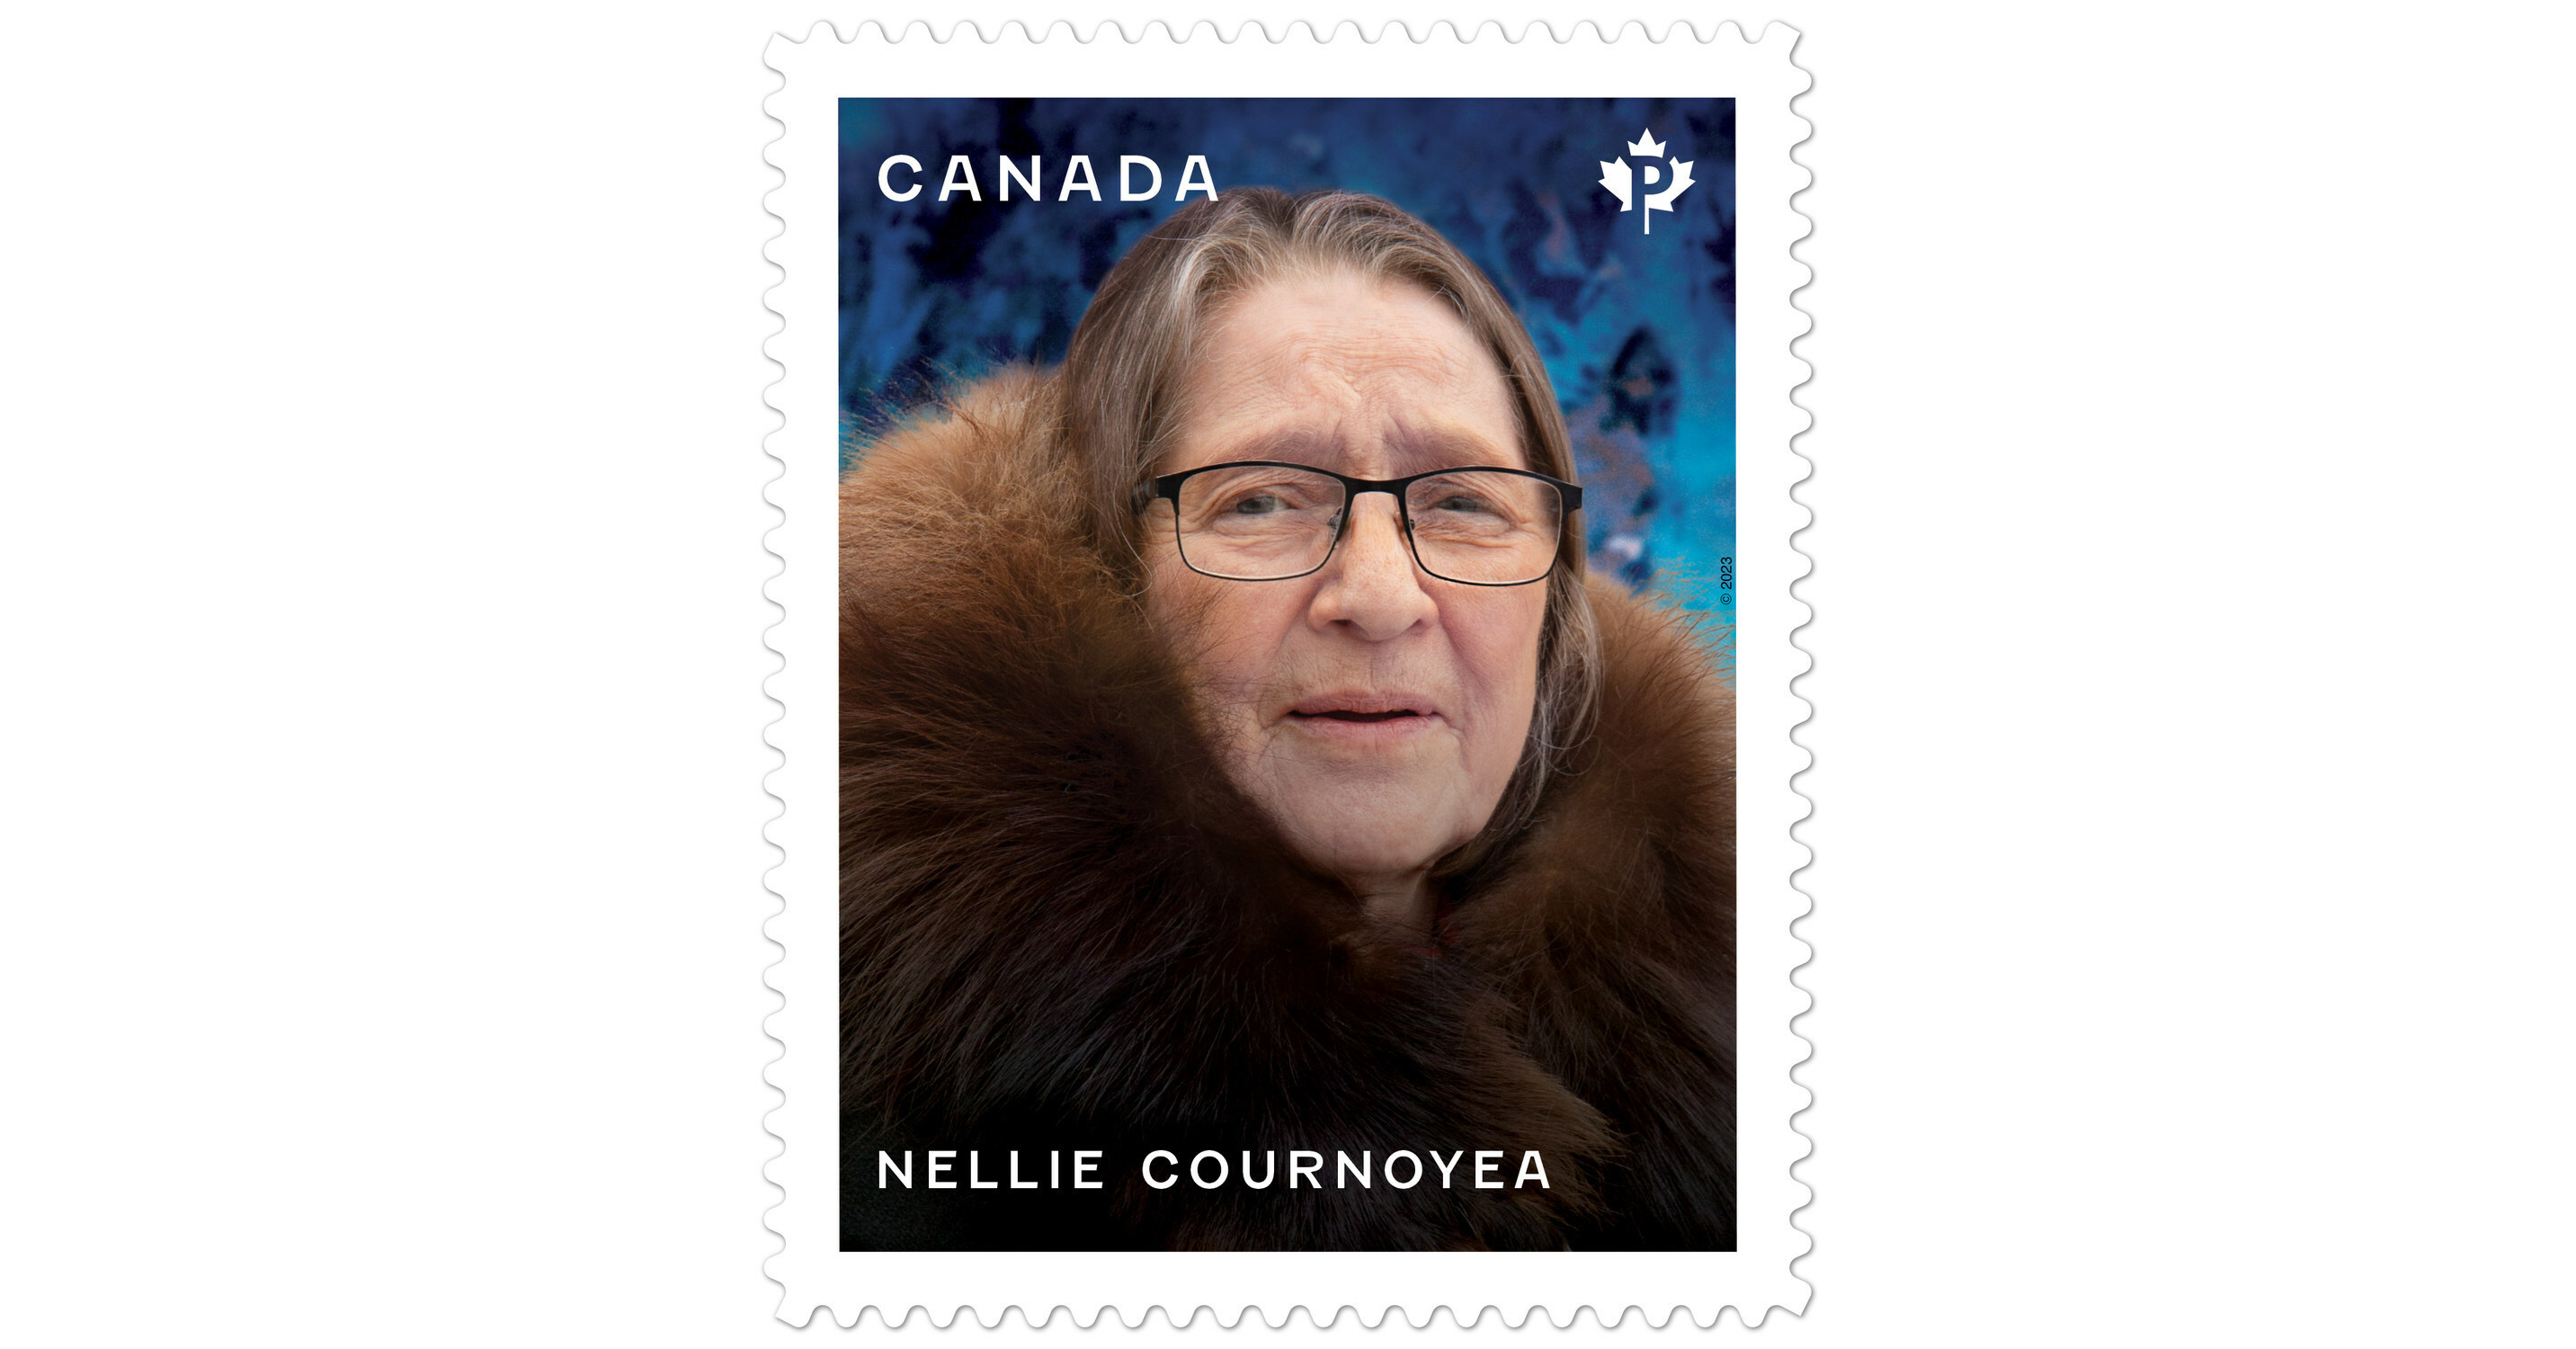 New stamp honors Nellie Cournoyea, the first Indigenous woman to lead a provincial or territorial government in Canada